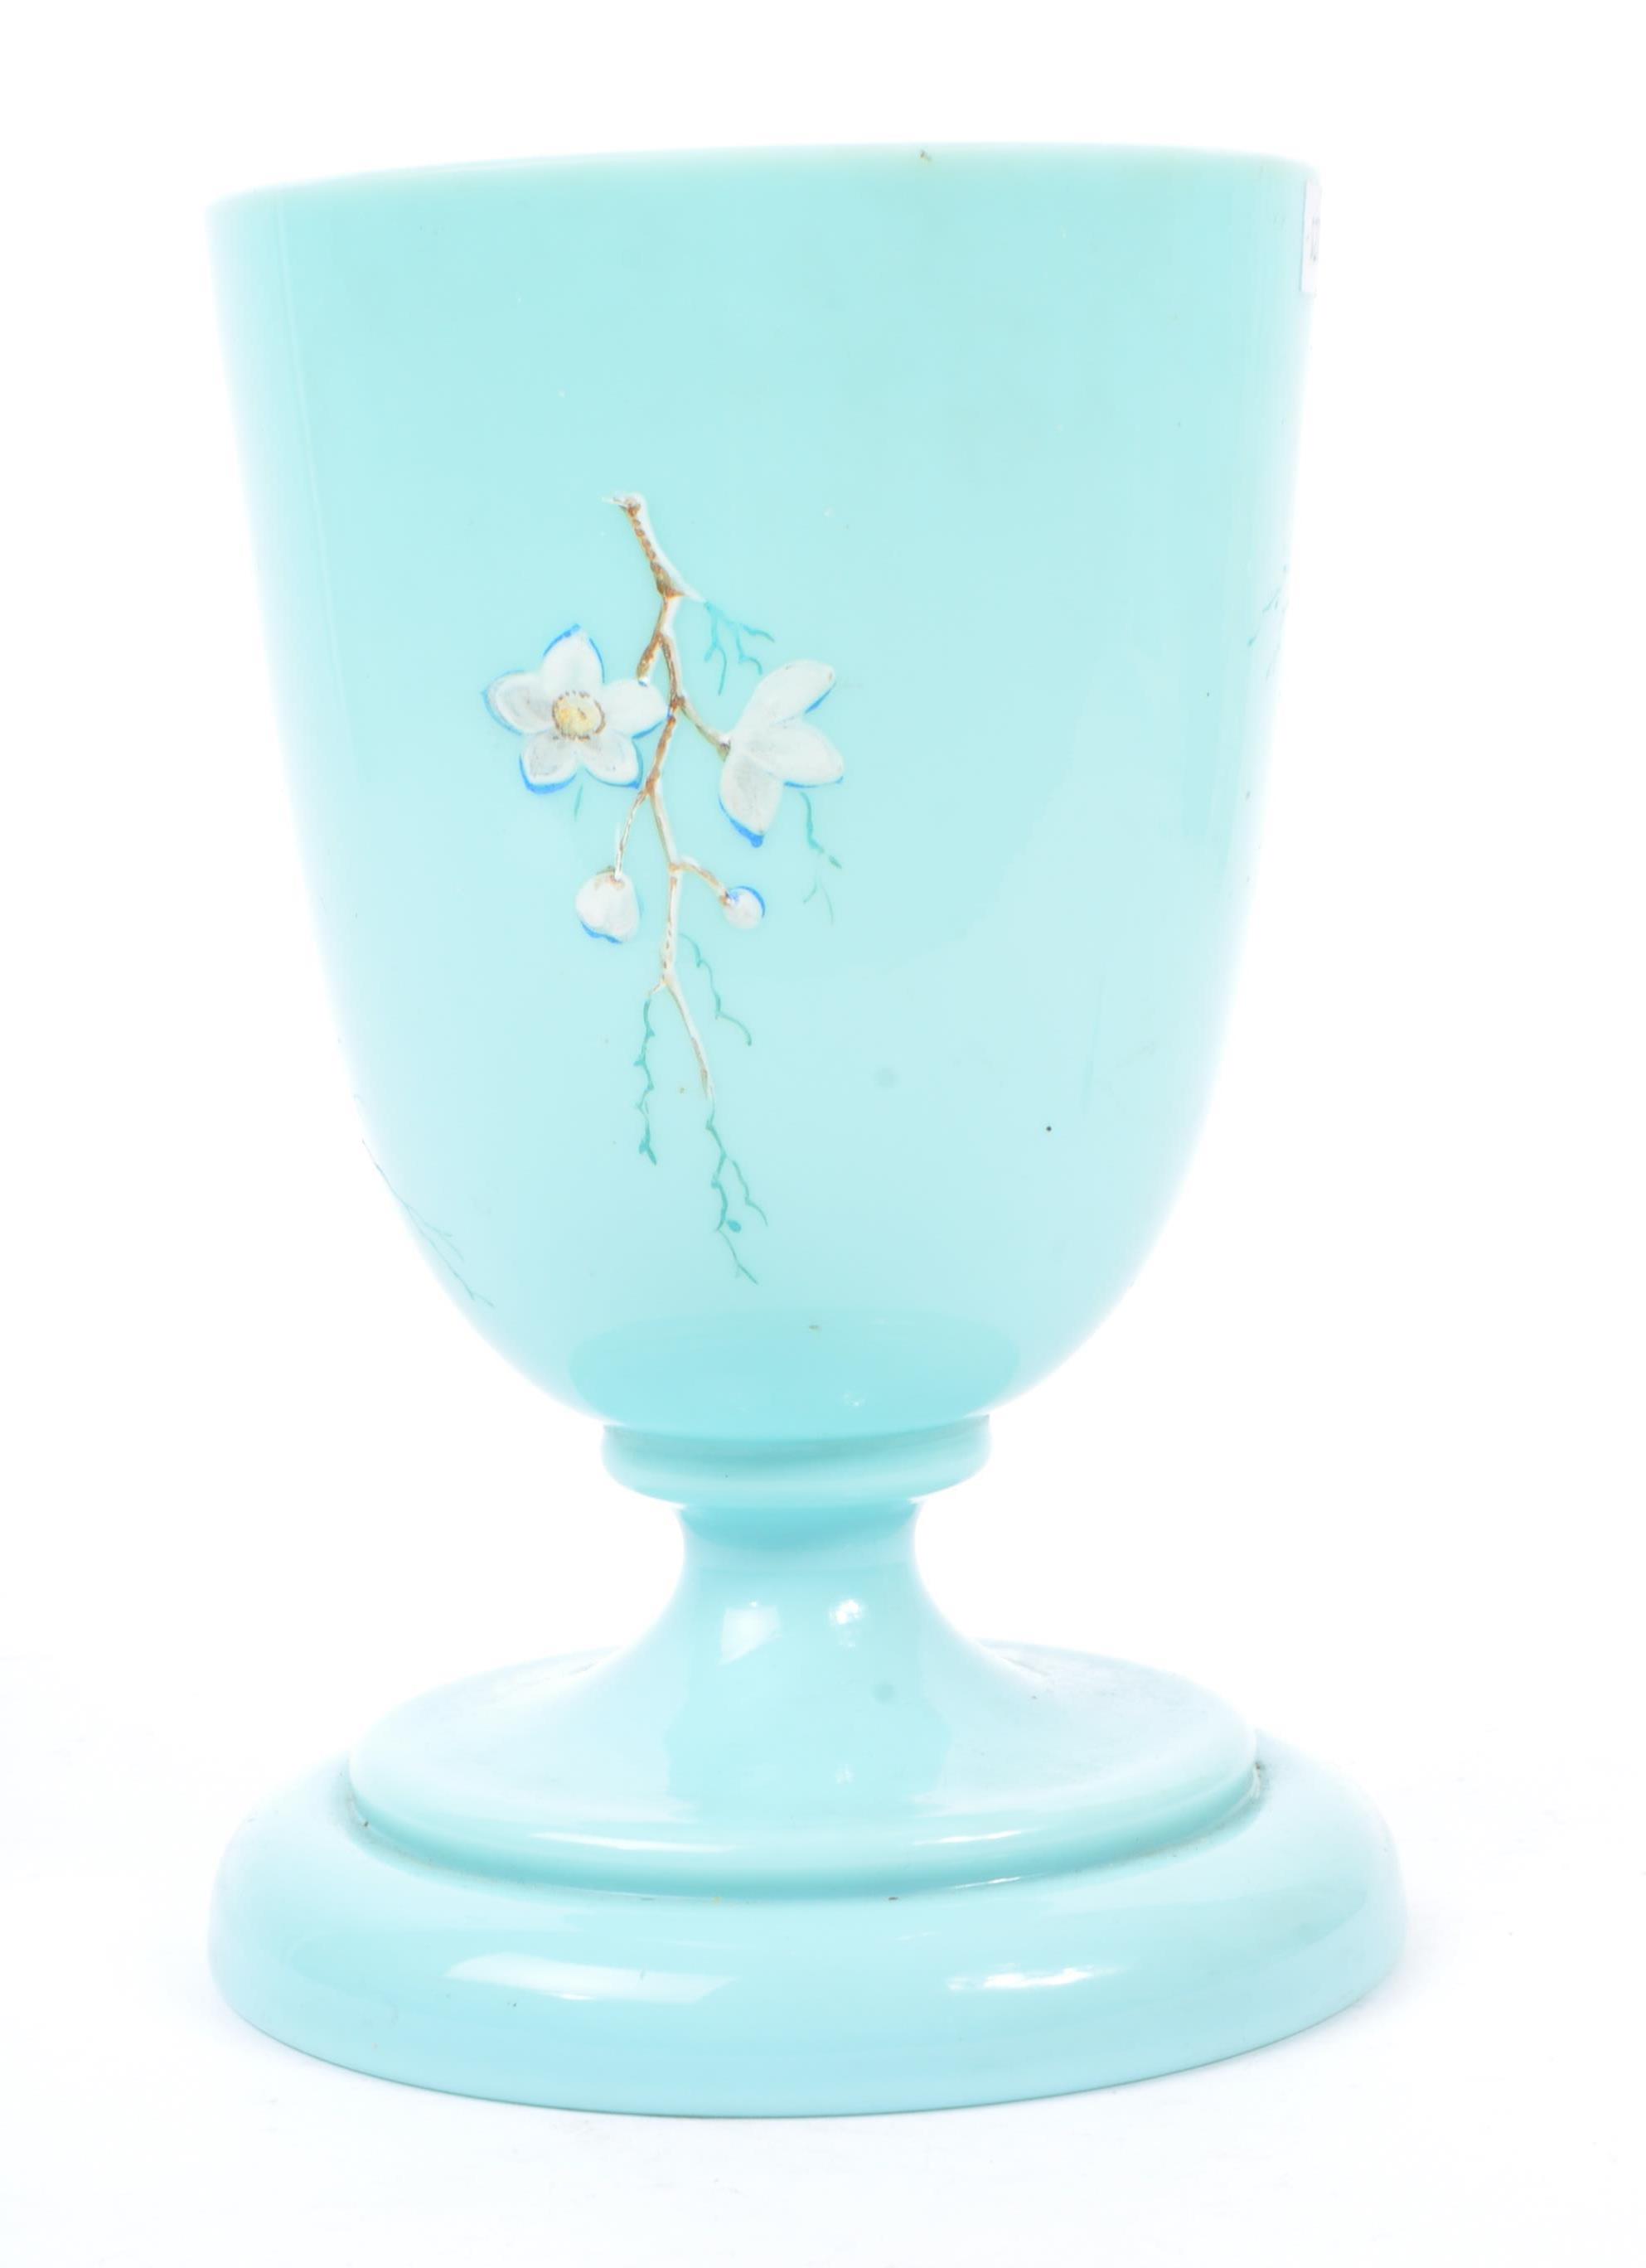 19TH CENTURY BLUE OPAQUE GLASS HAND PAINTED VASE - Image 3 of 7